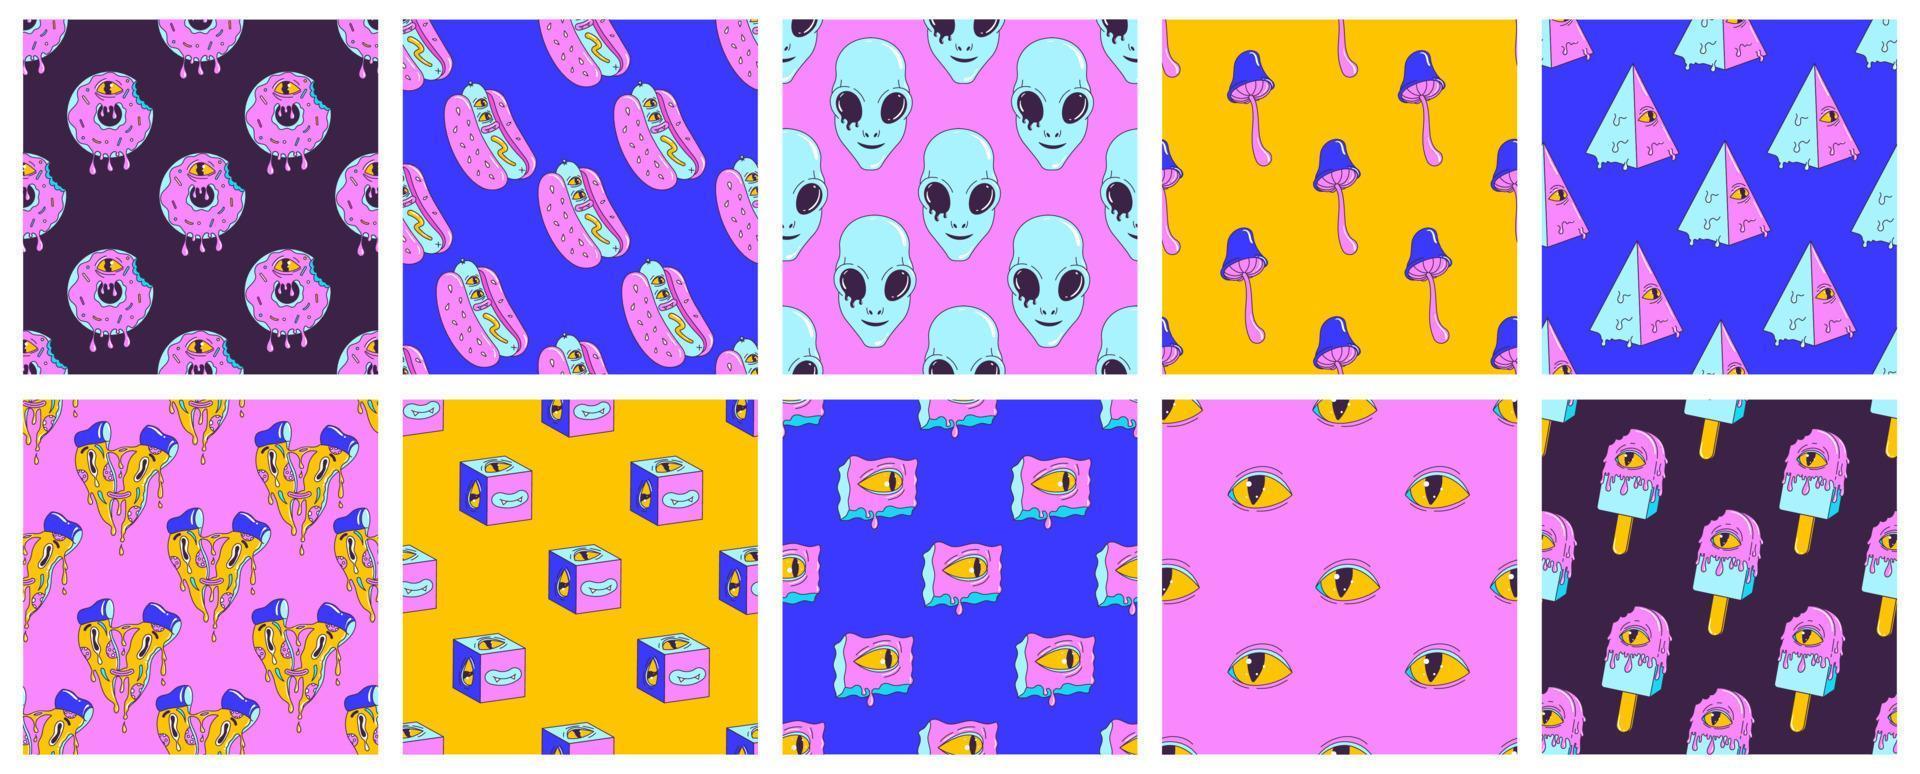 Psychedelic acid seamless pattern set with trendy weird characters and elements. Trendy trippy 90s - 2000s style. Modern posters. Vibrant color. Fast food, alien, crazy eyes. Funny vector illustration